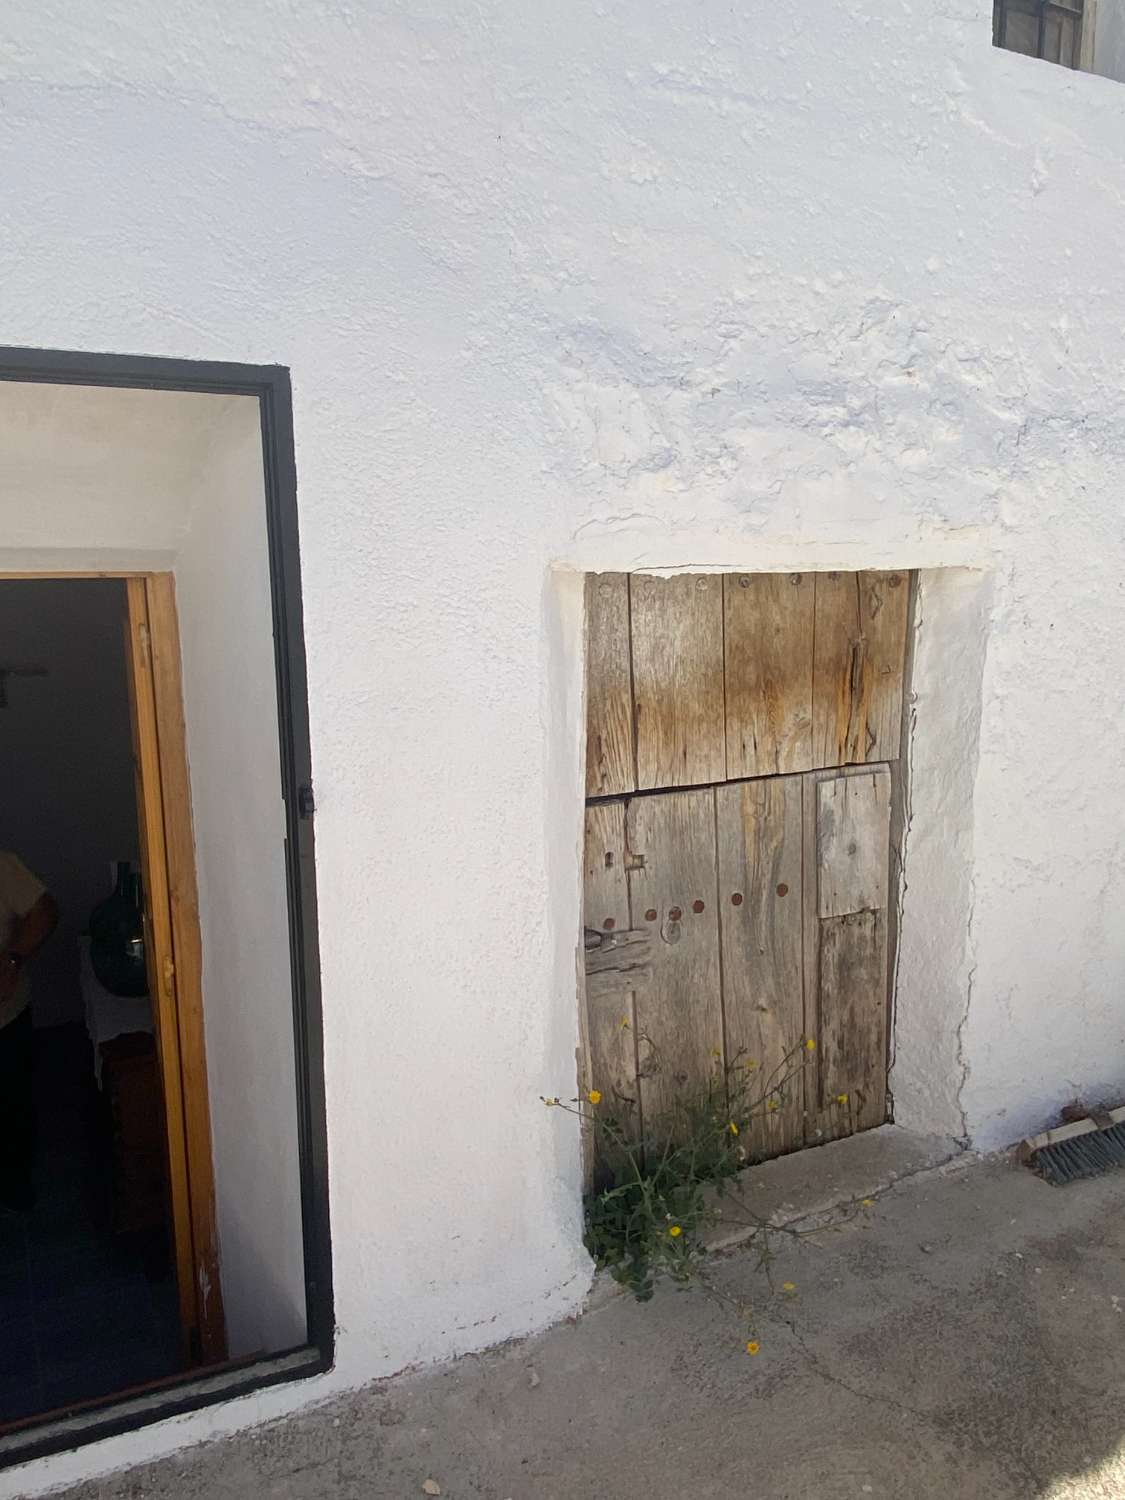 Rustic Cortijo 6 Bed,2Bath with views and land in Velez-Blanco